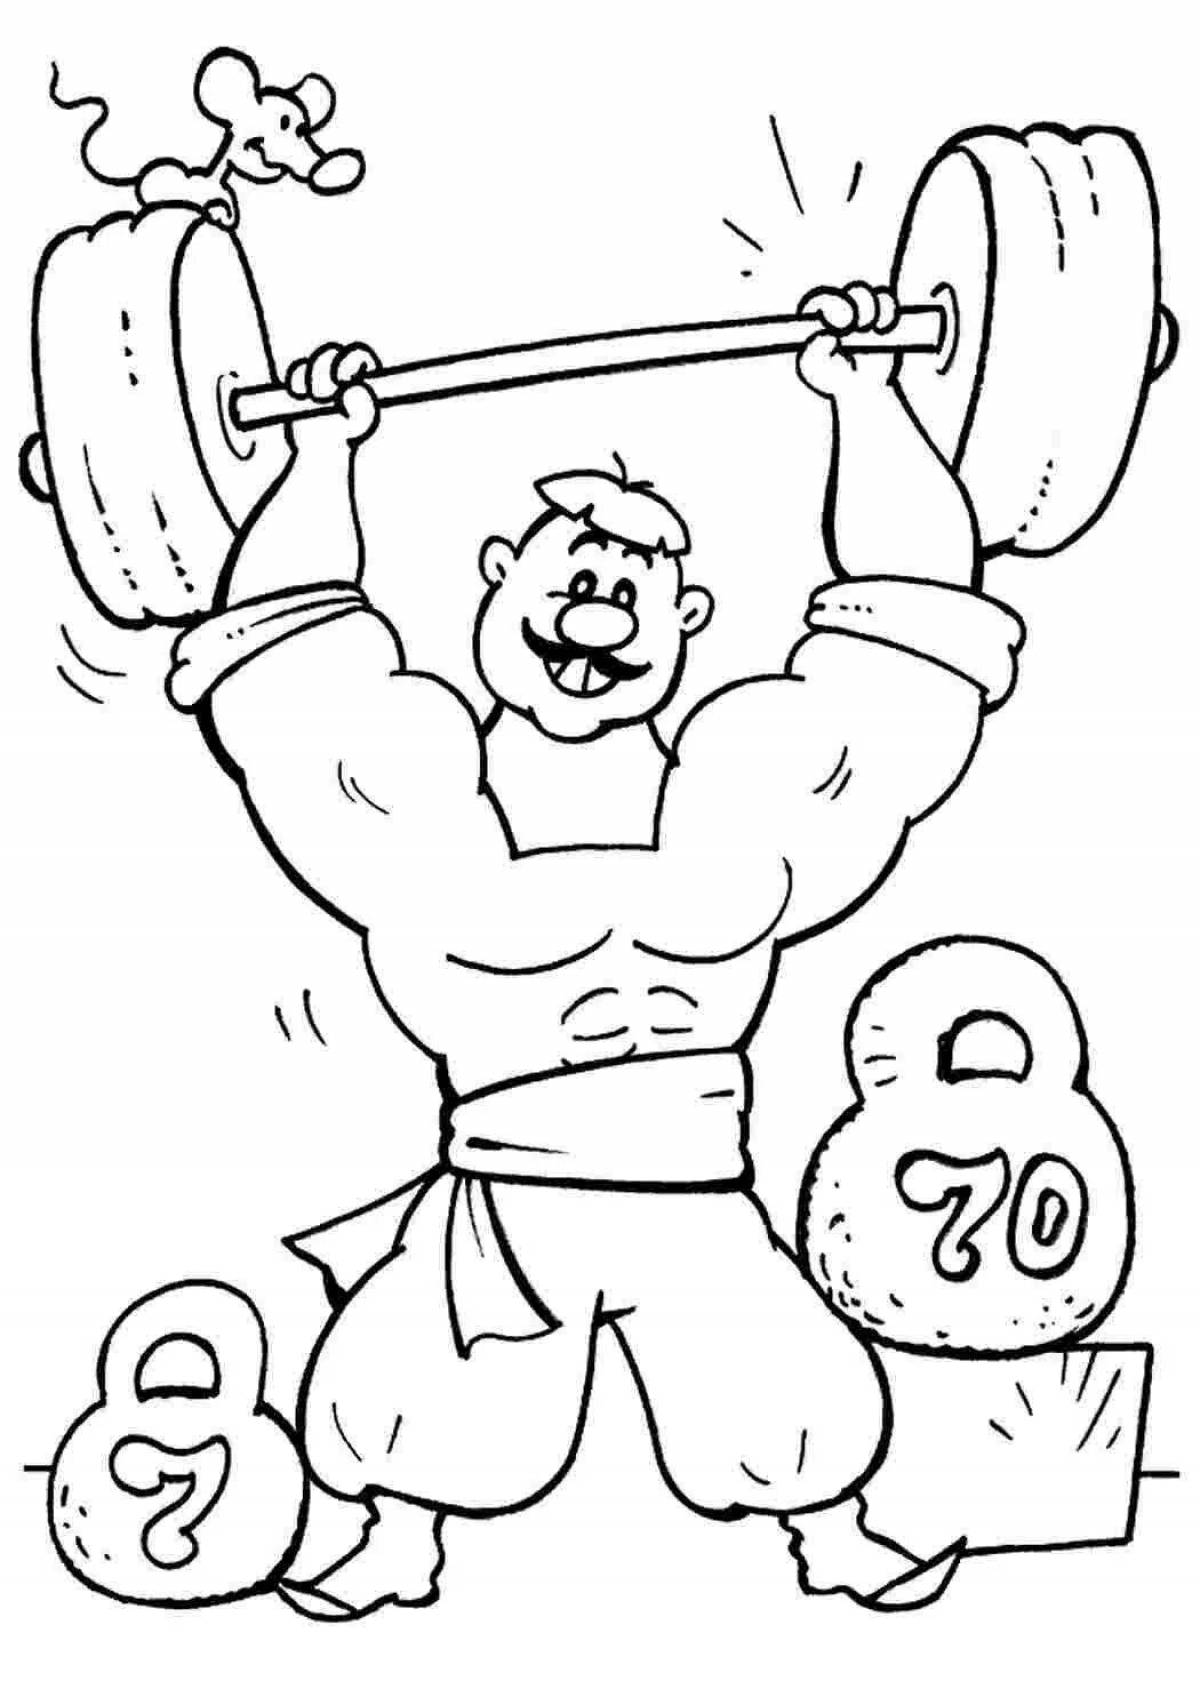 Coloring majestic weightlifter